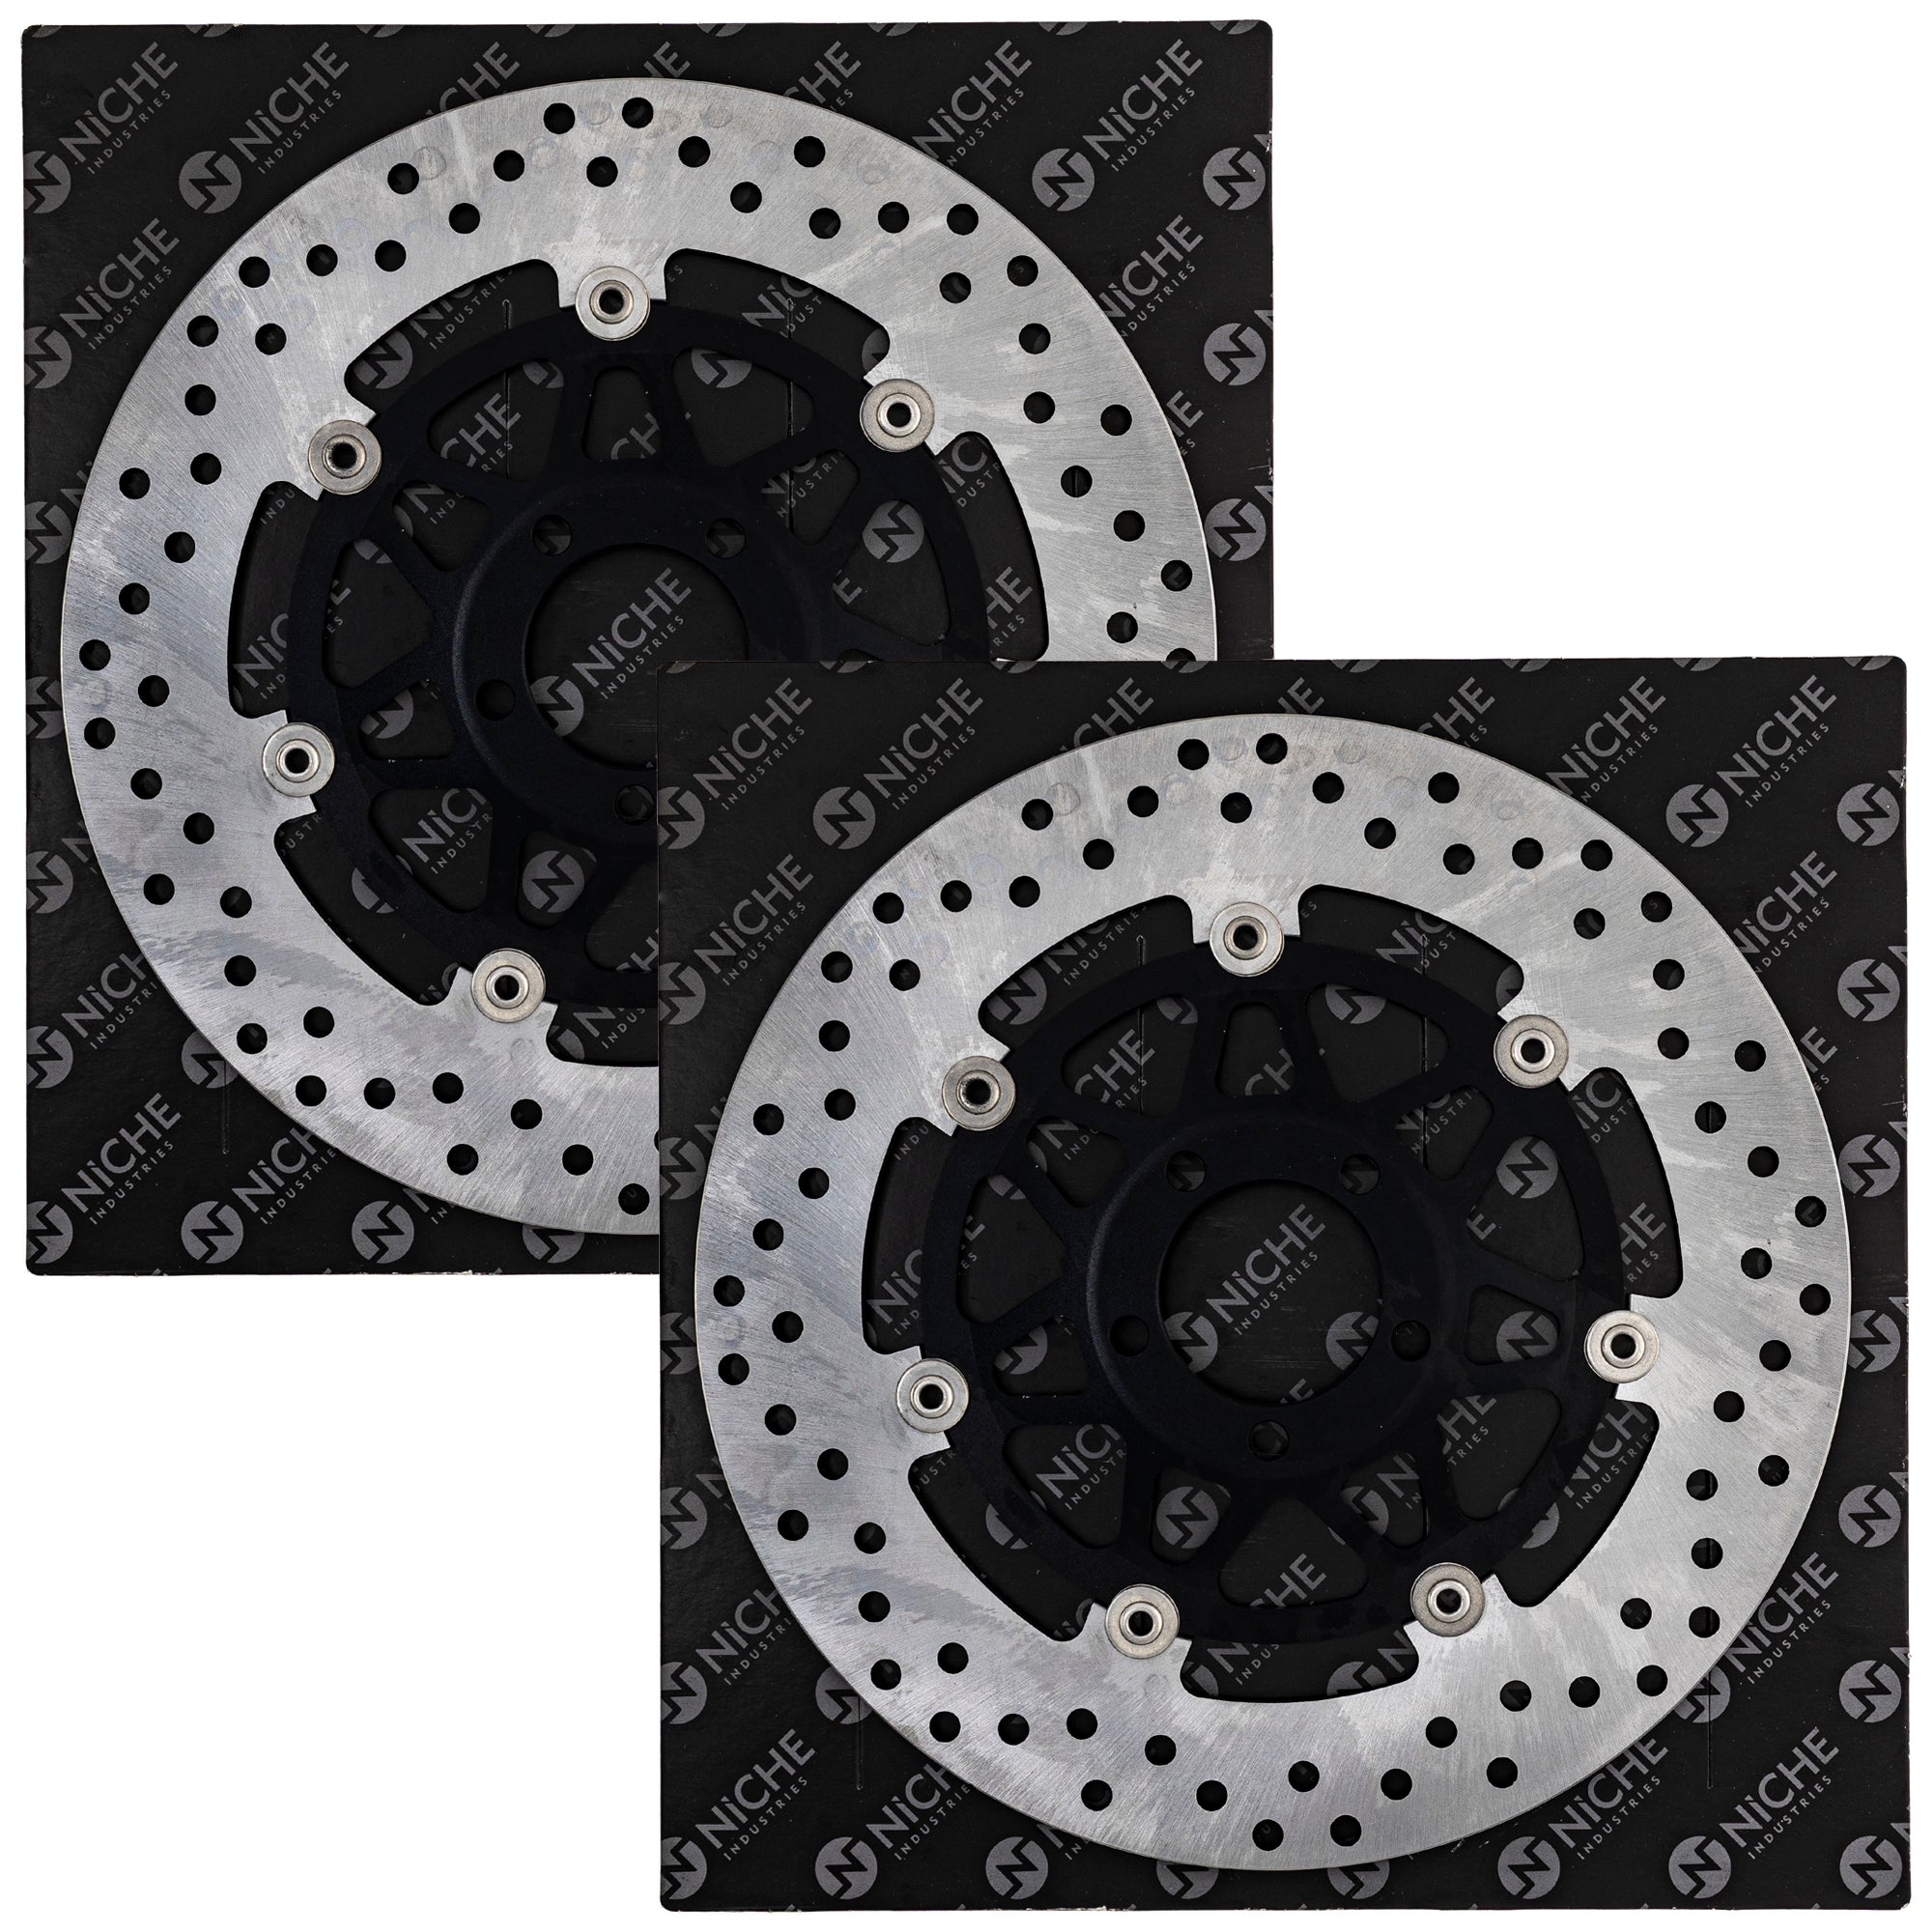 NICHE 519-CRT2213R Front Brake Rotor 2-Pack for zOTHER ZZR1200 Vulcan